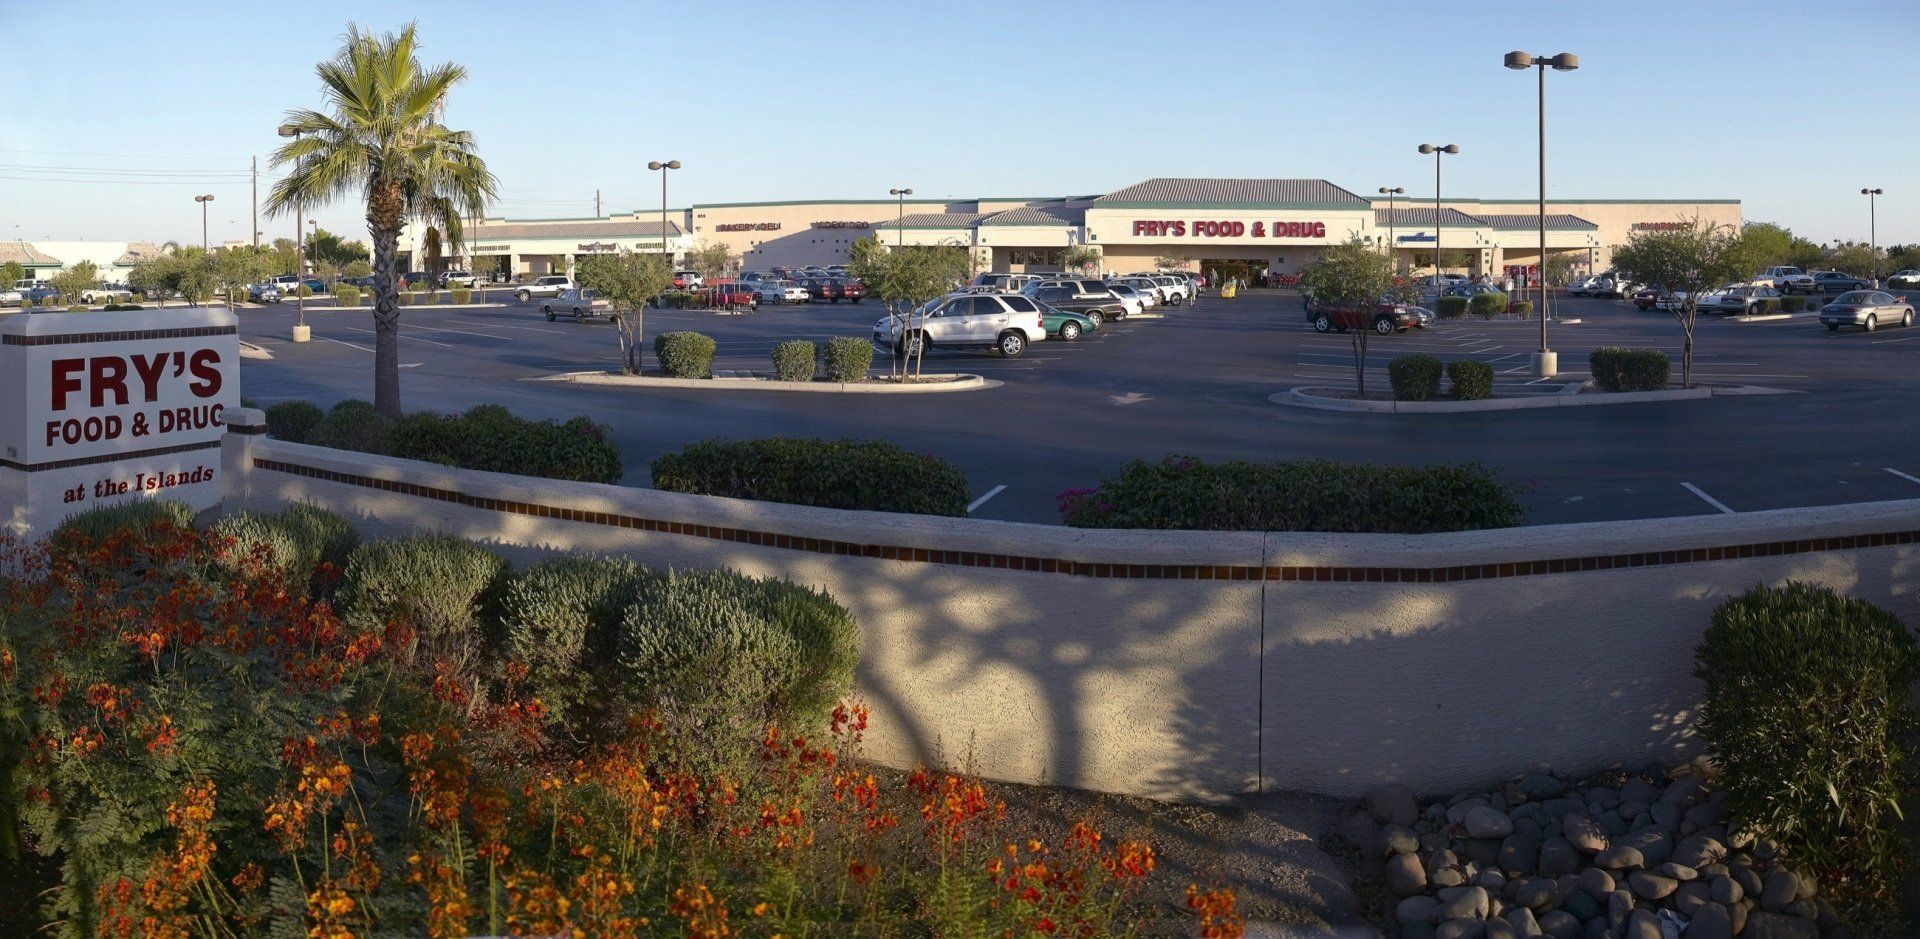 Fry's Commercial Property